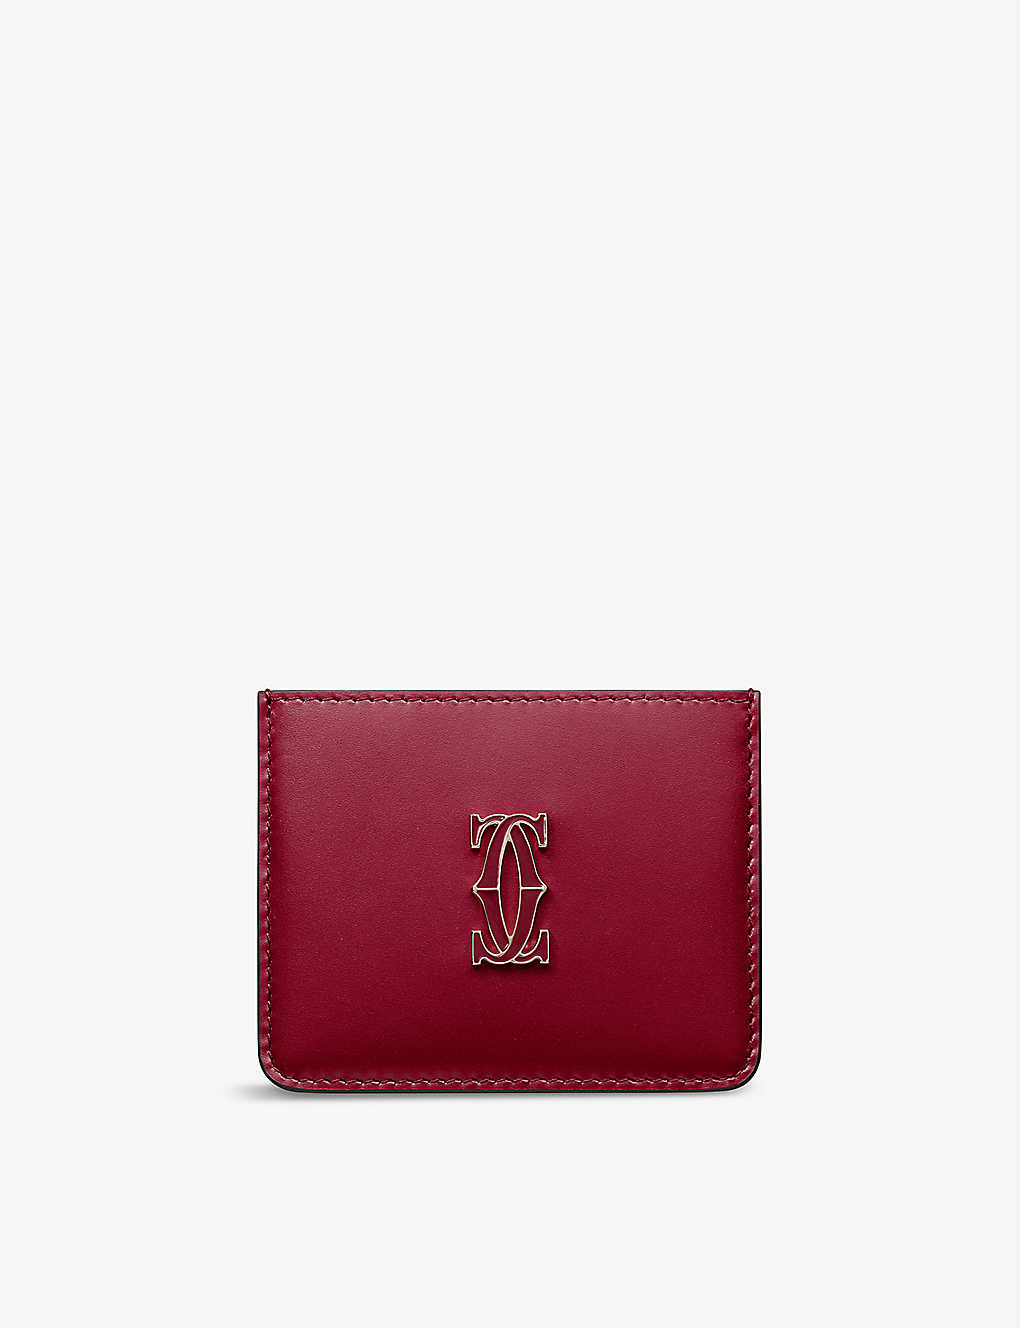 Cartier Cherry Red Double C De Leather Card Holder